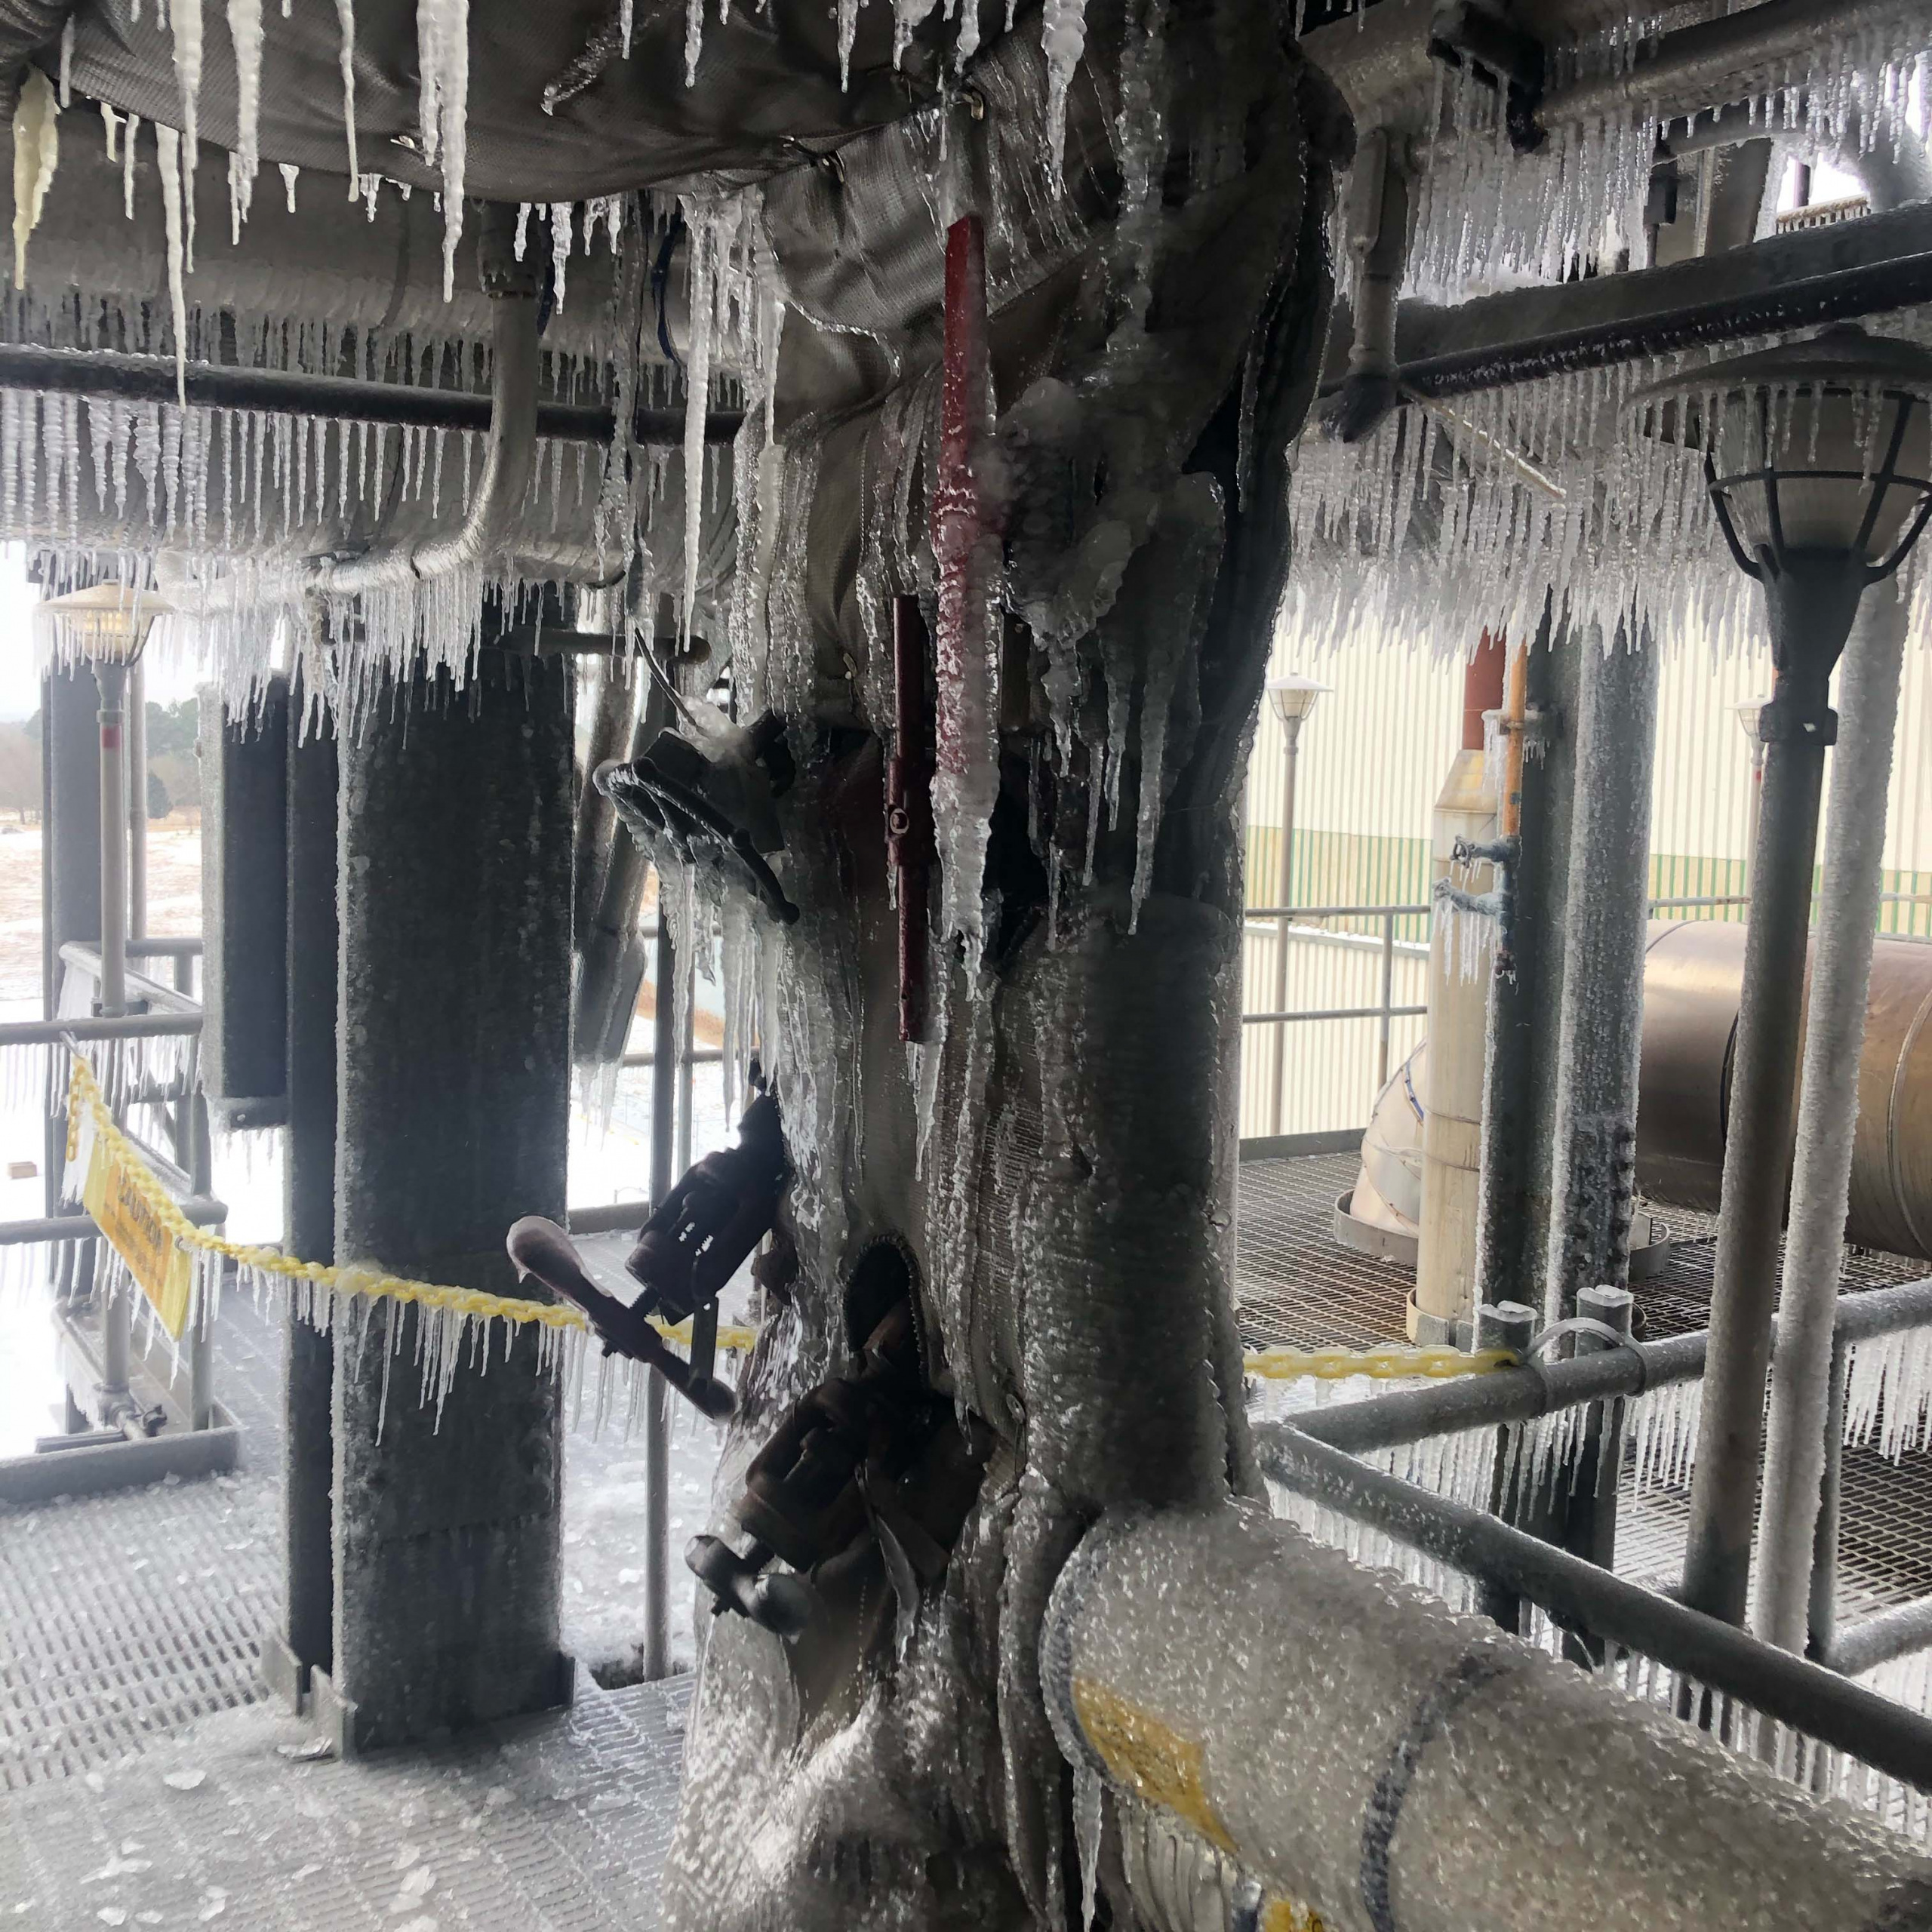 Gas power plants across the state froze, taking 26,000MW, of what was billed as reliable base load power, offline. Photo credit: Entergy